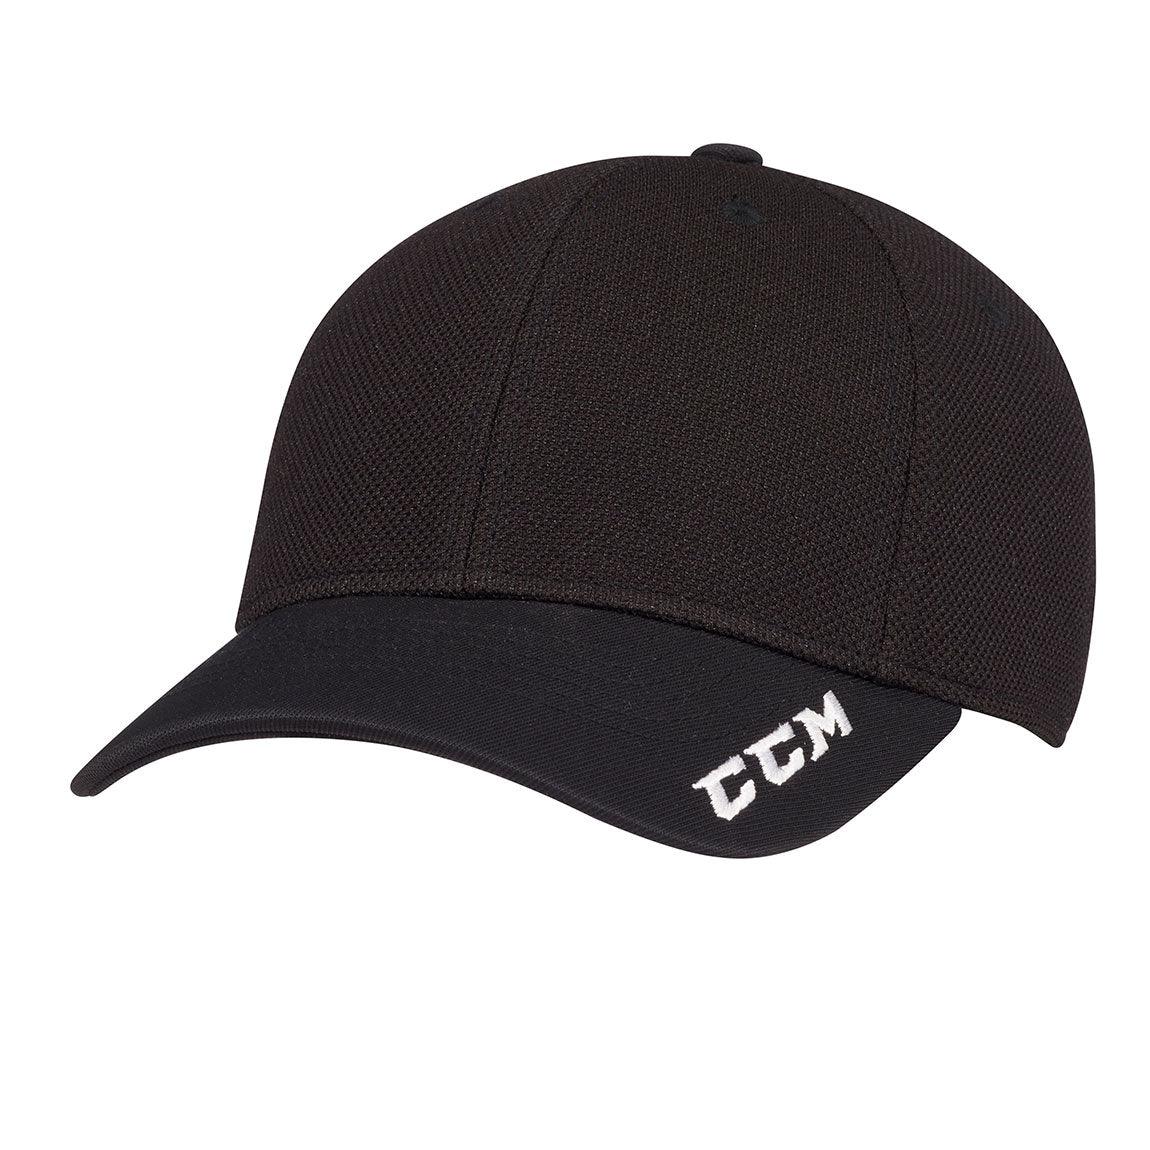 Team Training Perforated Snapback Cap - Senior - Sports Excellence